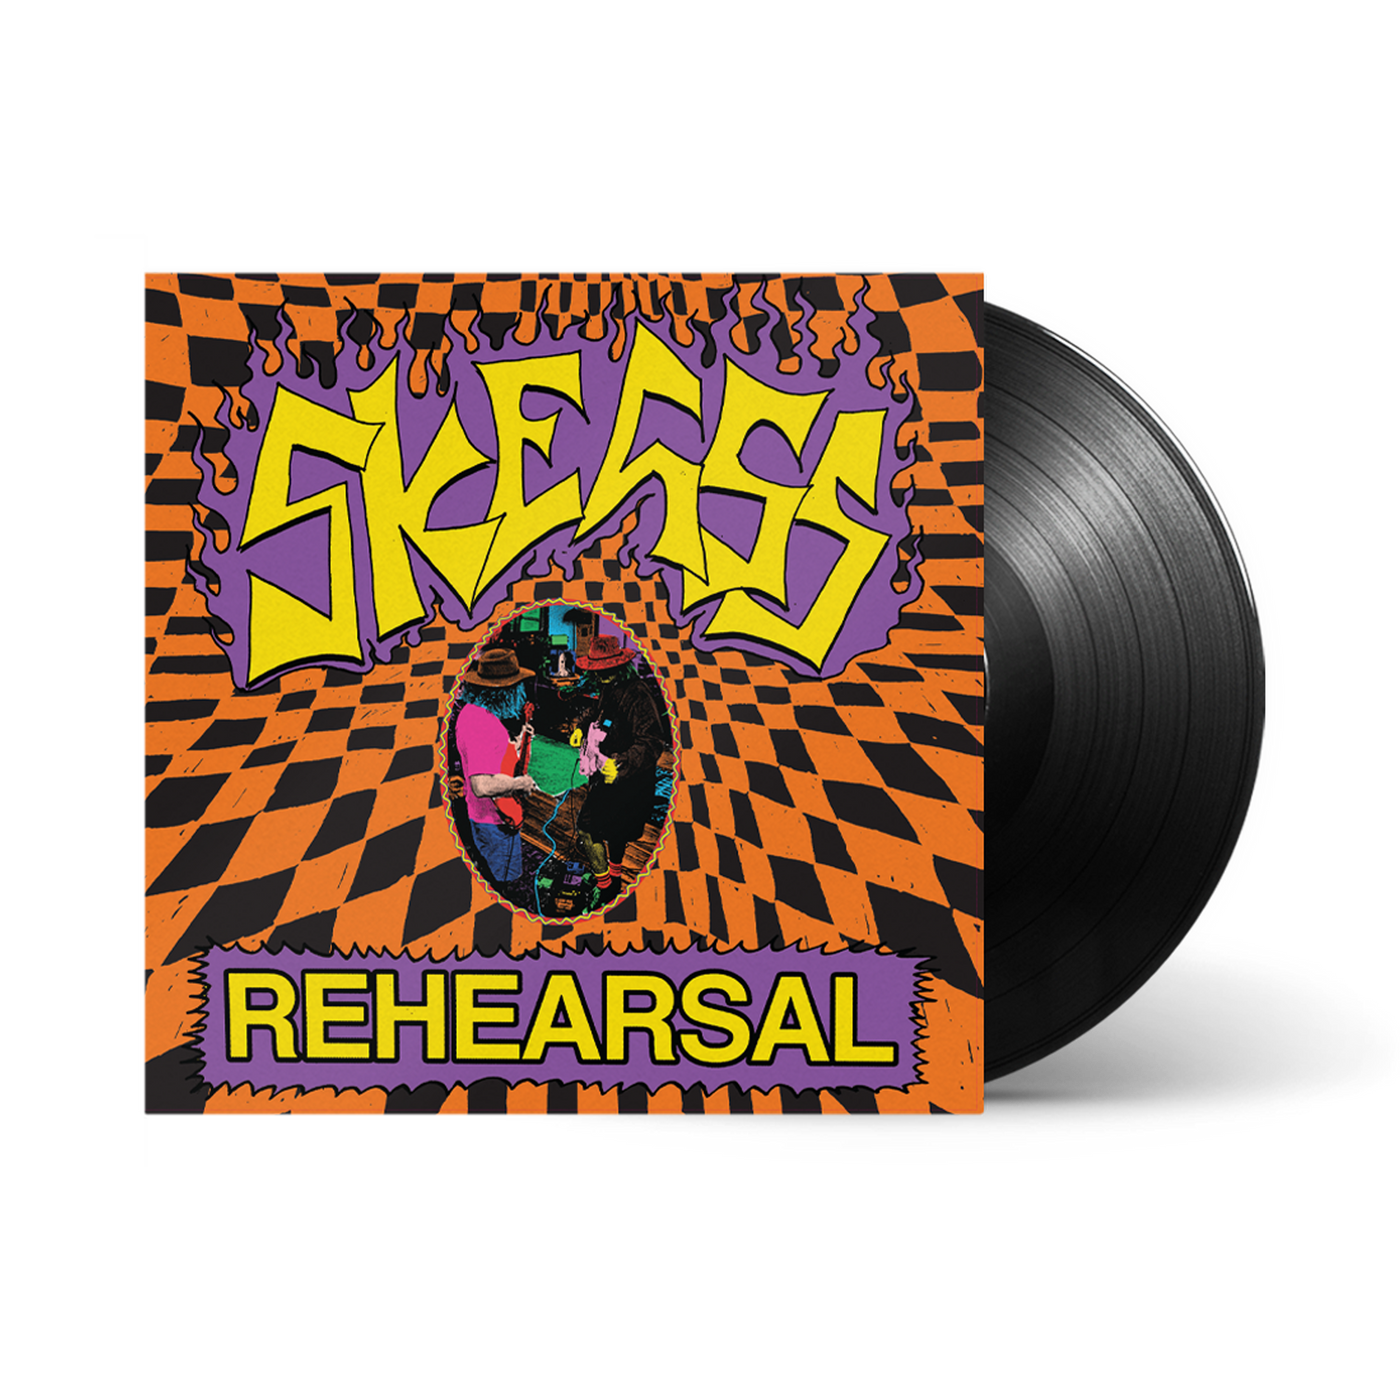 Rehearsal Standard LP Limited Edition Orange Cover